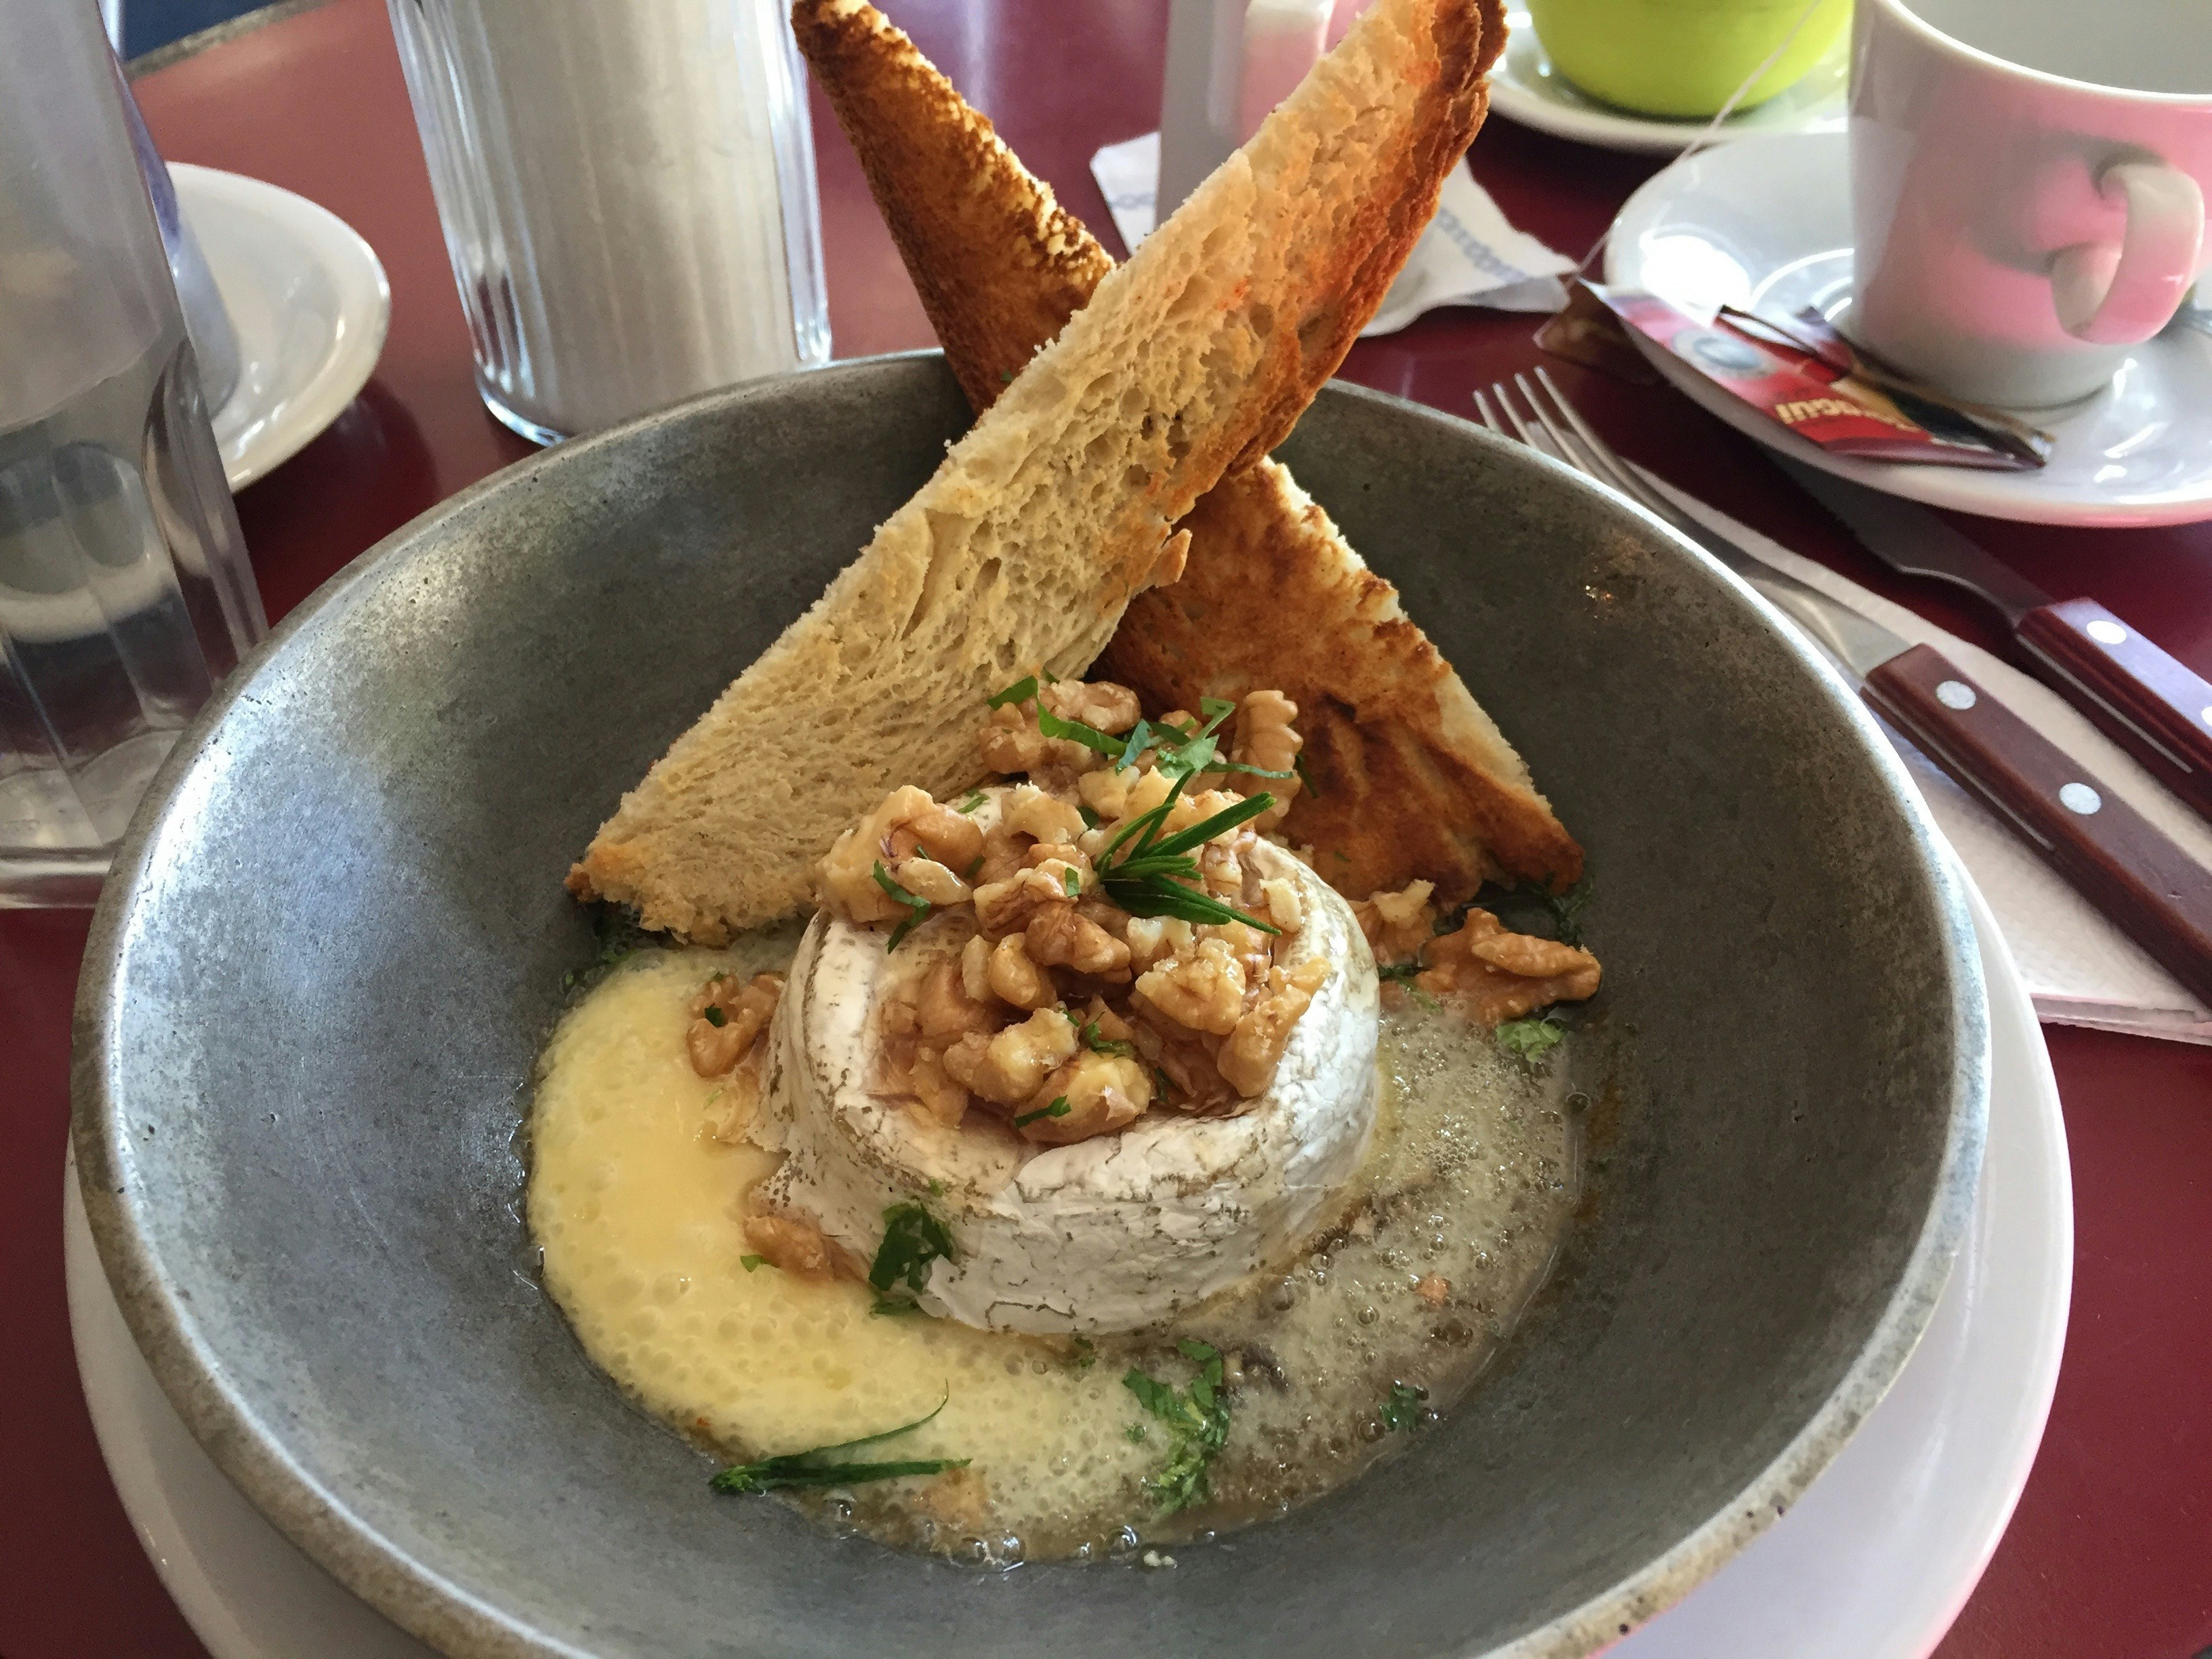 A dish at Lo del Francés; a gray bowl contains a small baked camembert cheese, walnuts and two artistically arranged slices of toast.